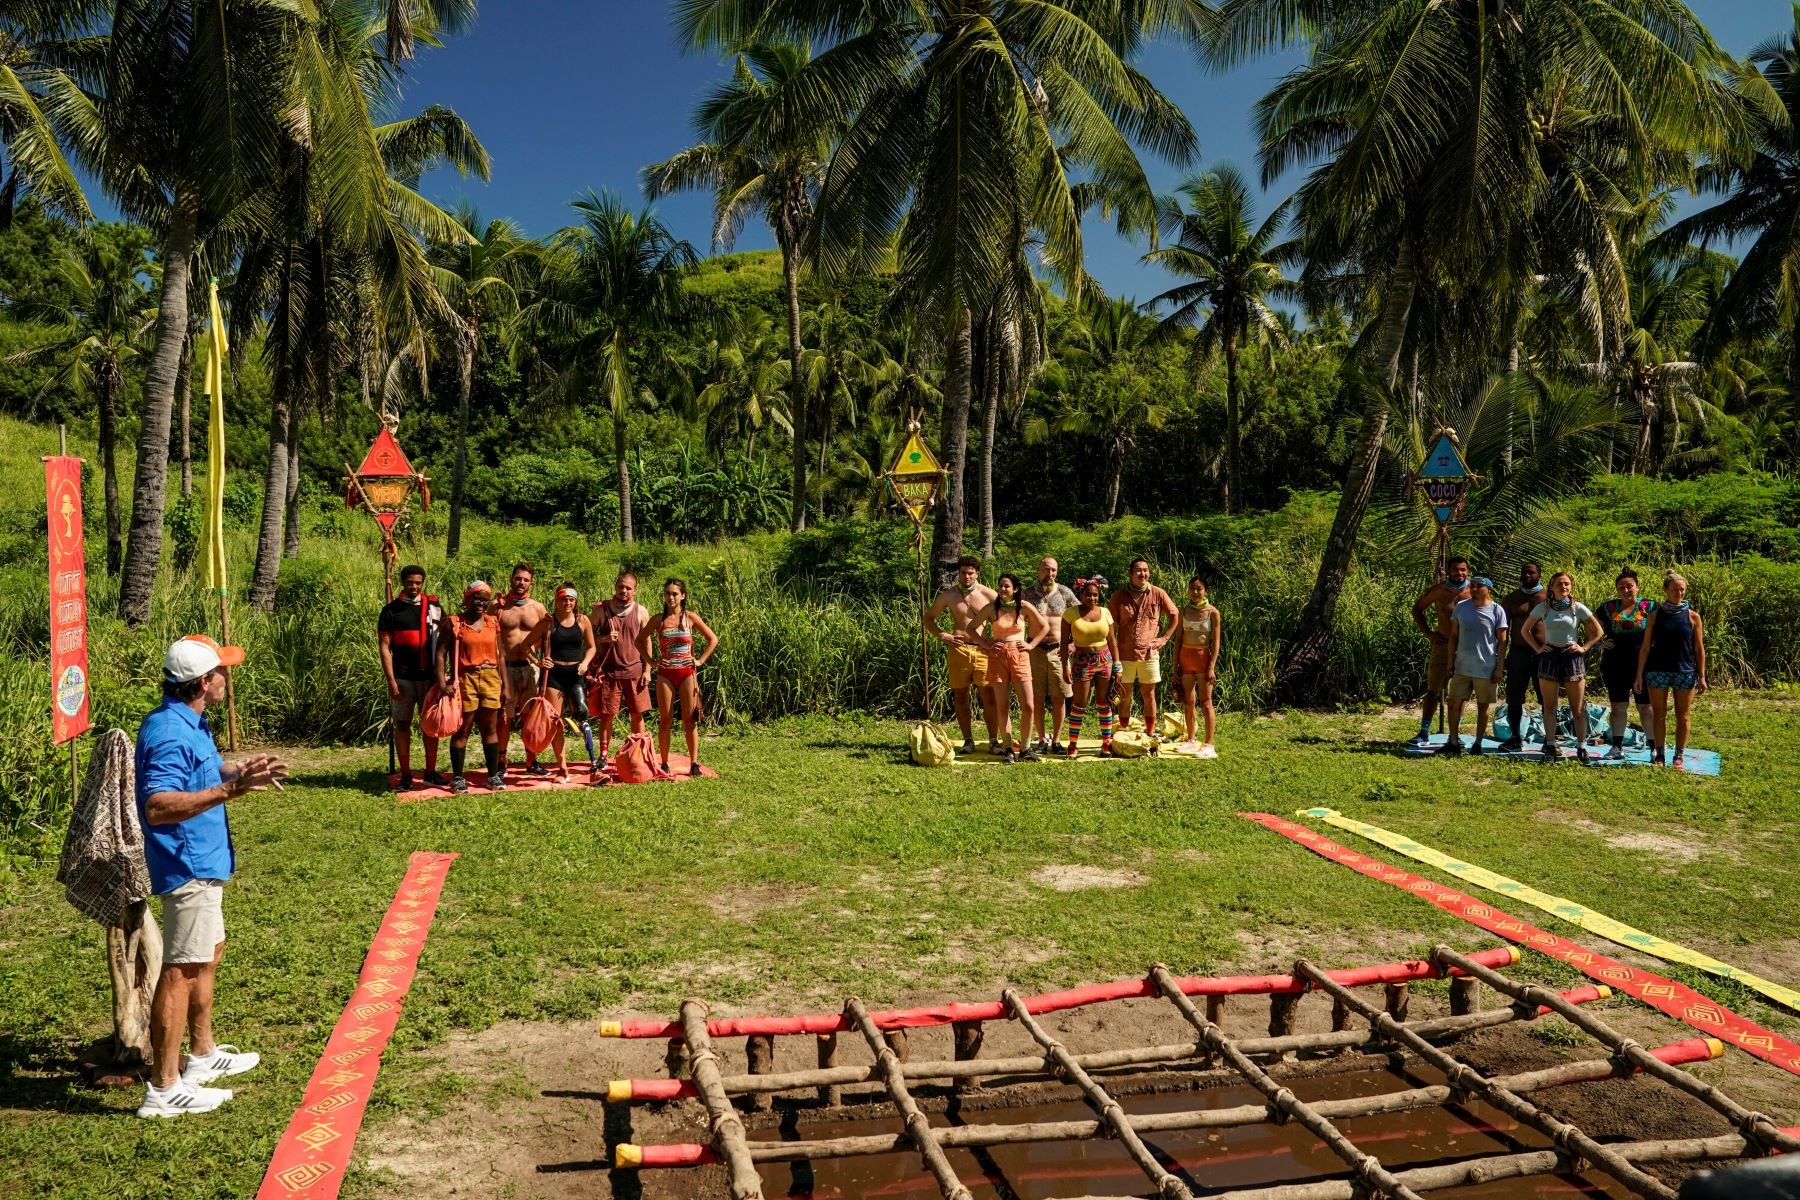 Host Jeff Probst explains a challenge to the 'Survivor' Season 43 cast, and, according to spoilers, the challenges are more difficult this season. 